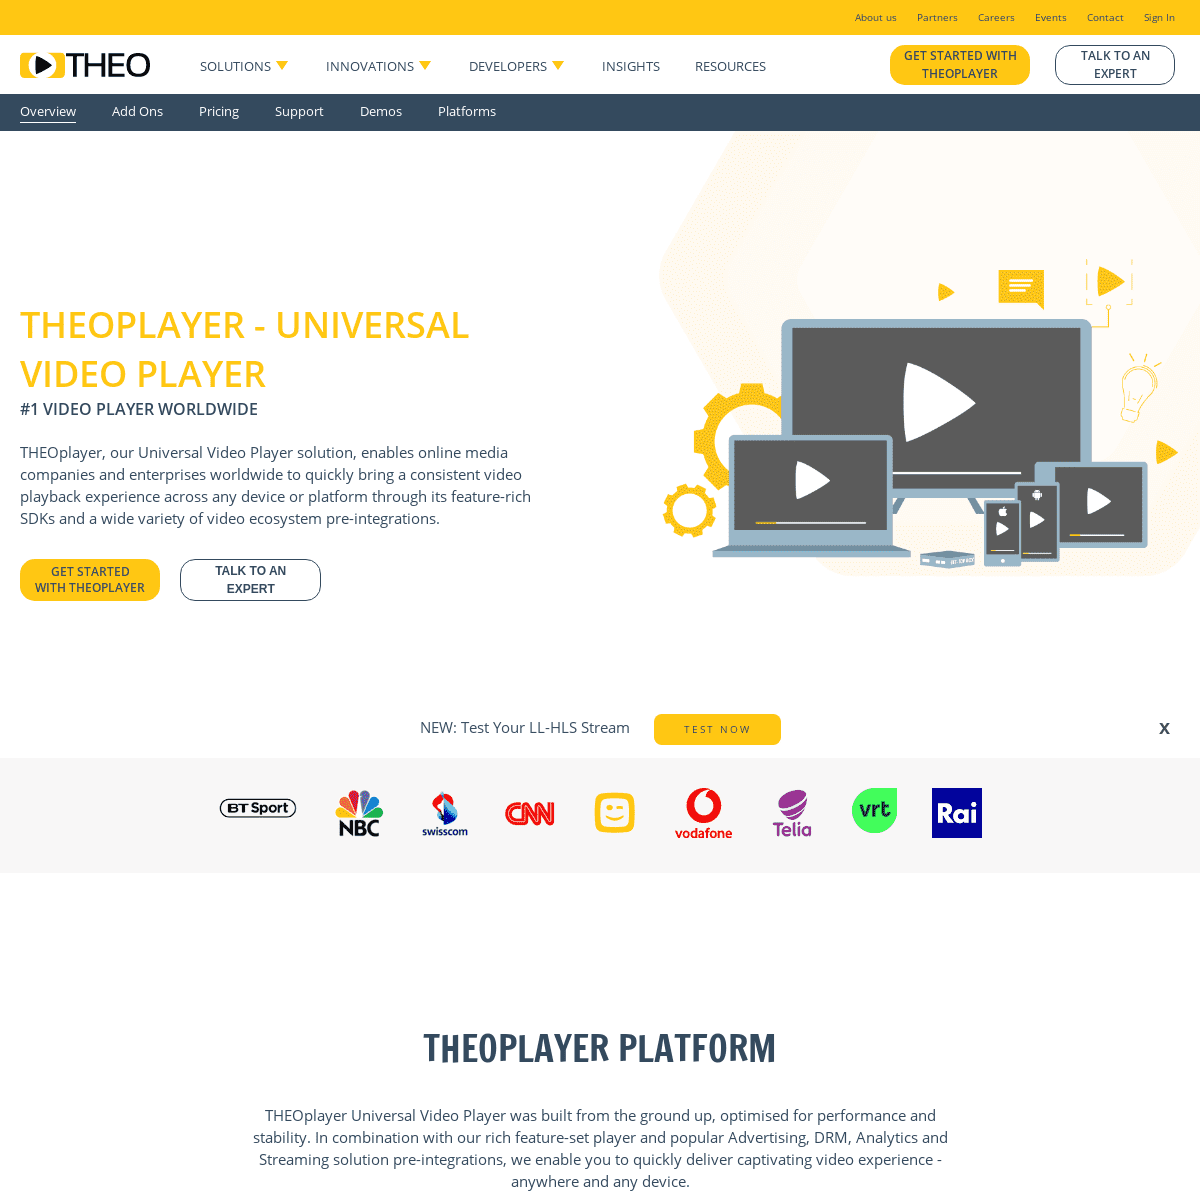 A complete backup of https://theoplayer.com